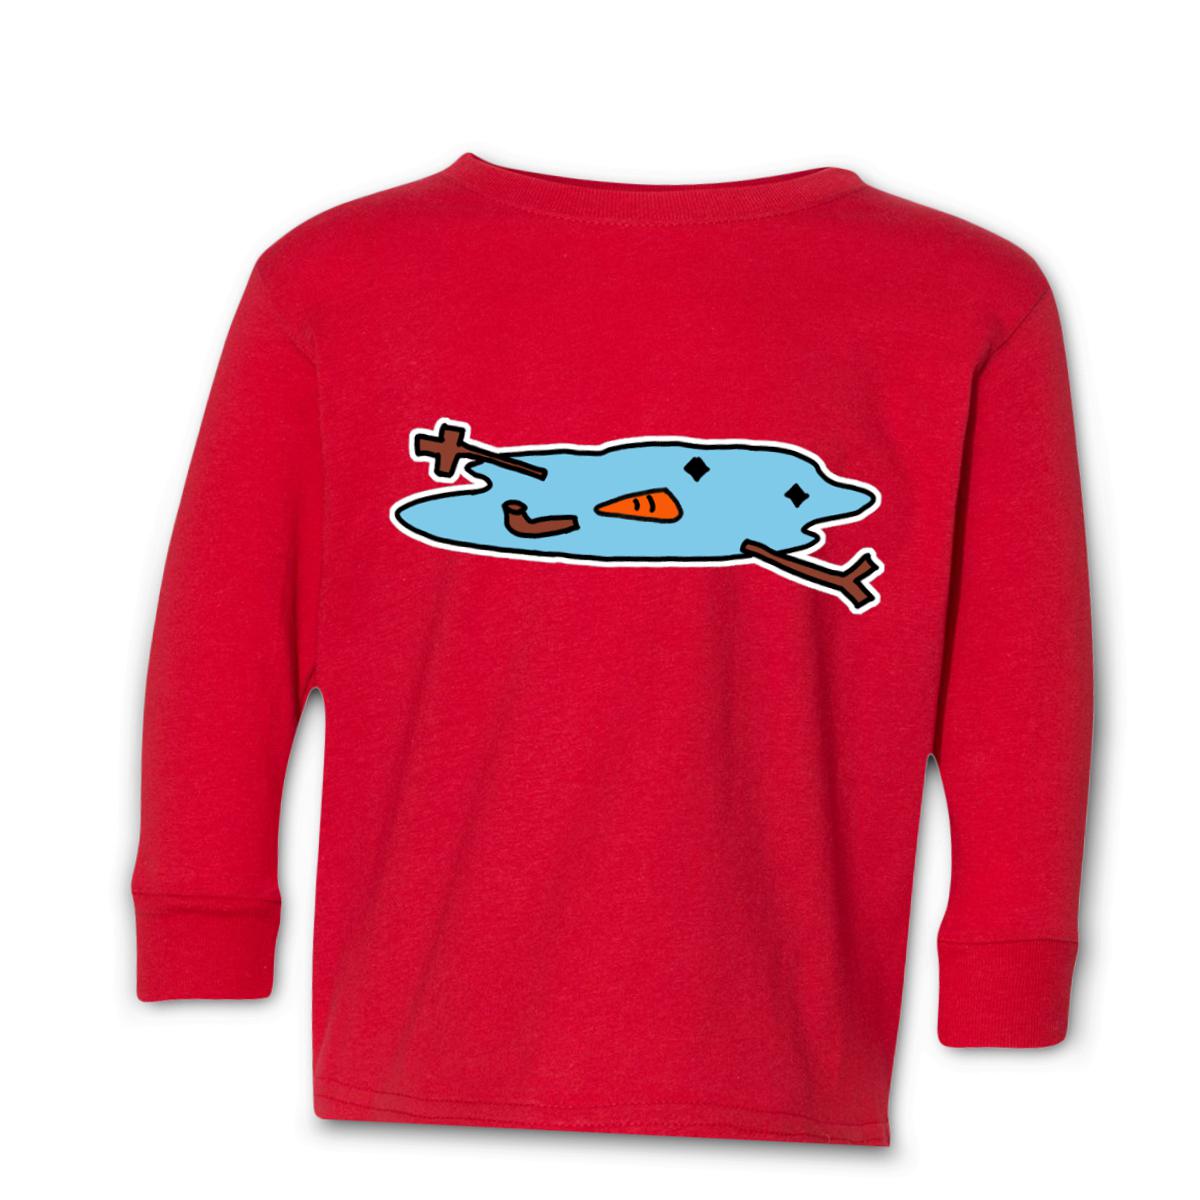 Snowman Puddle Kid's Long Sleeve Tee Small red